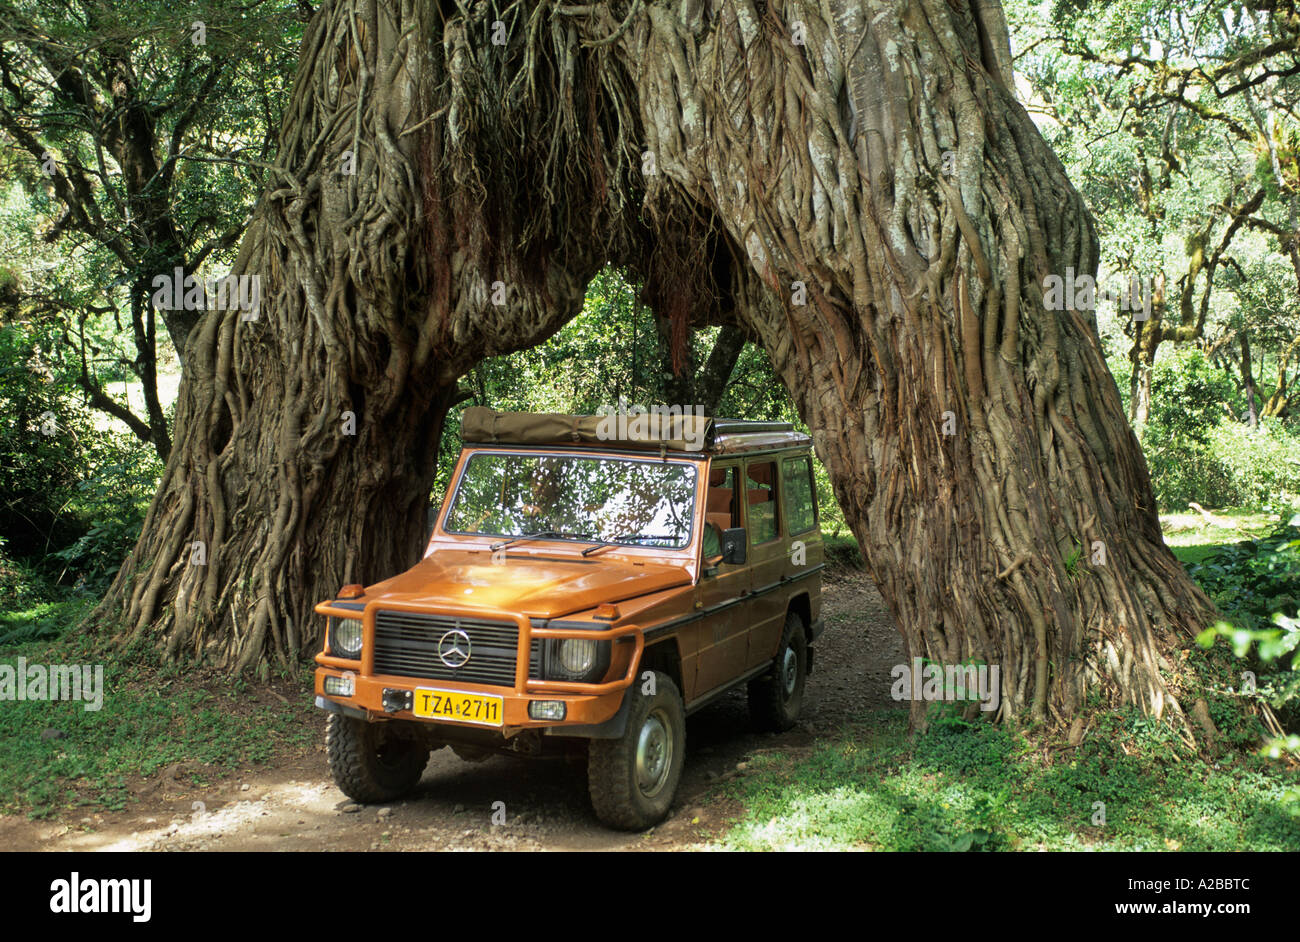 Fourwheeldrive vehicle driving through a hole in giant fig tree, Arusha National Park, Tanzania Stock Photo